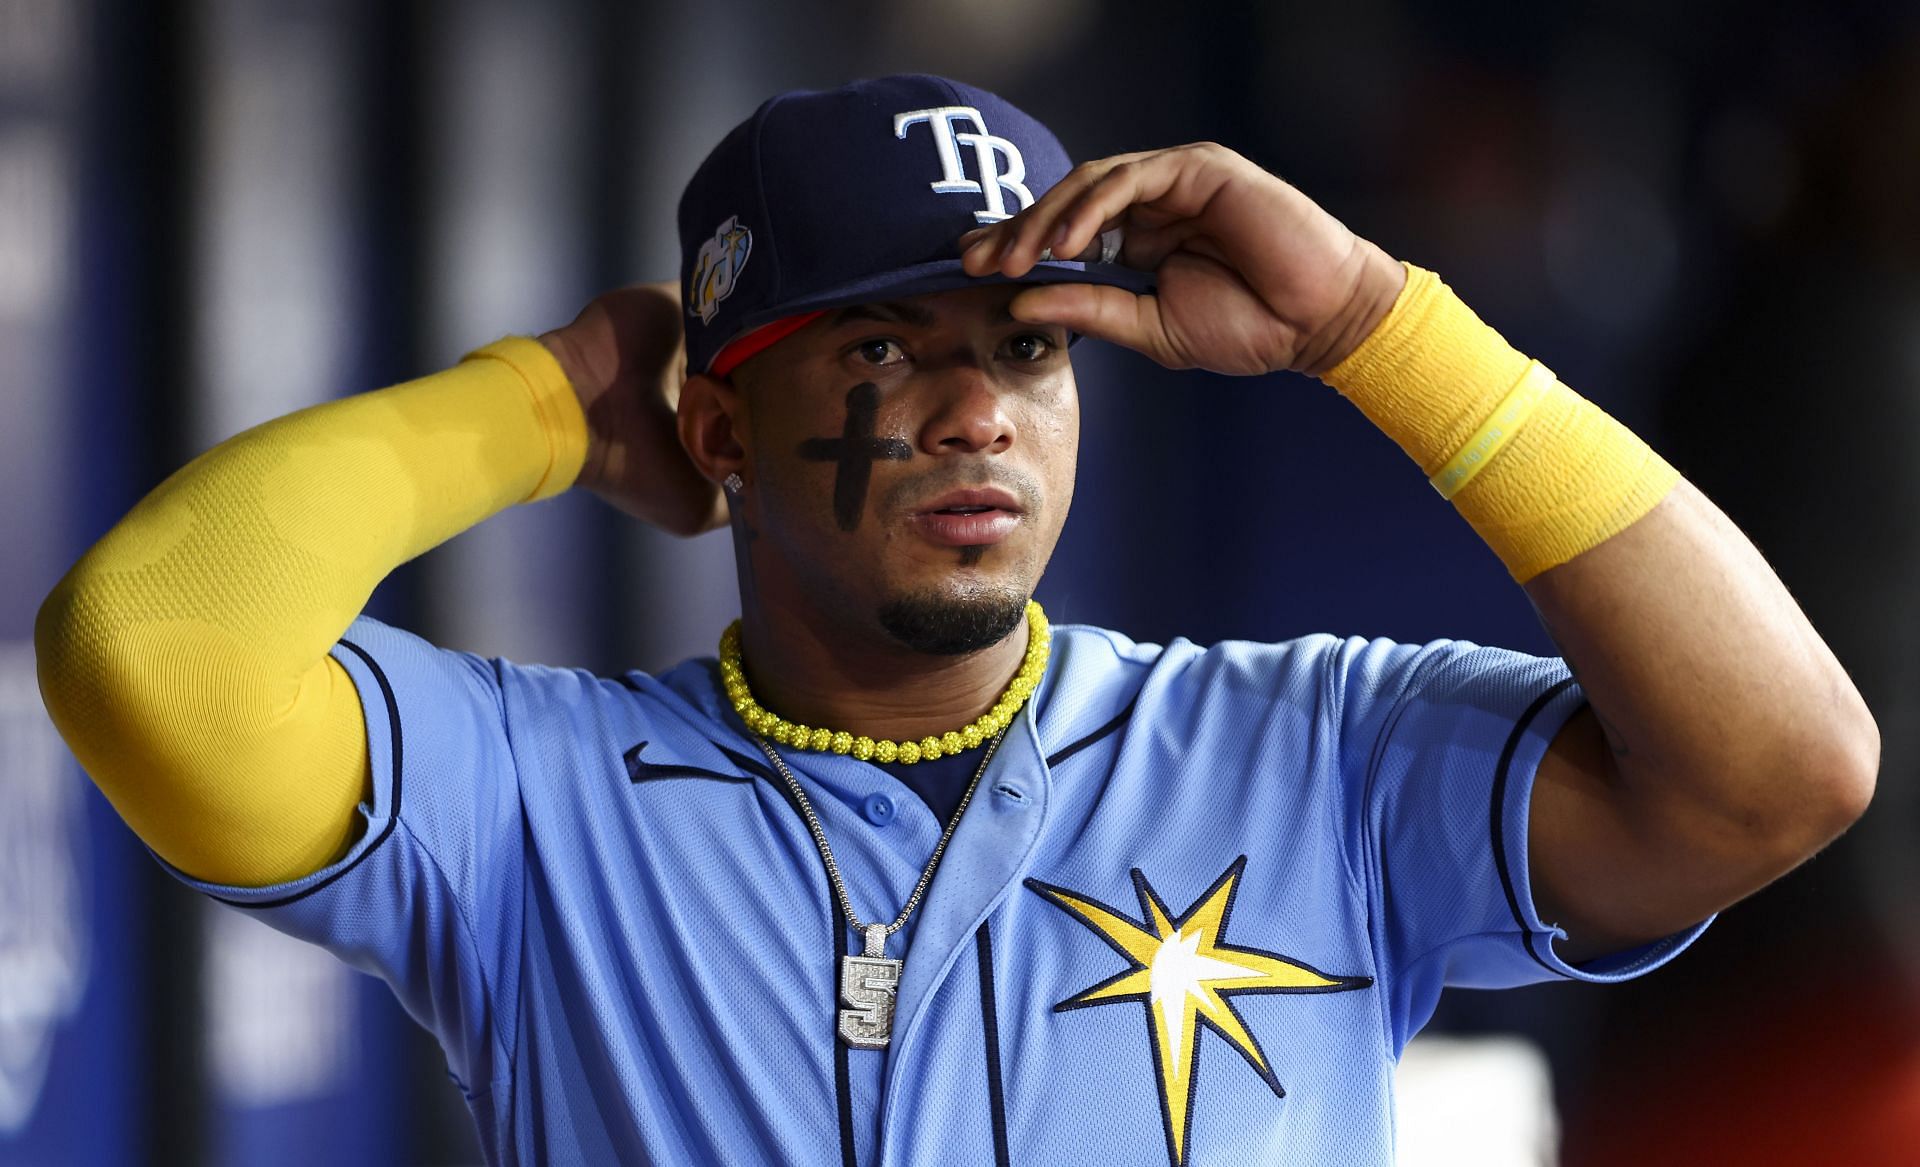 Is the Rays' 40-18 start legit or a fluke? These MLB analysts weigh in